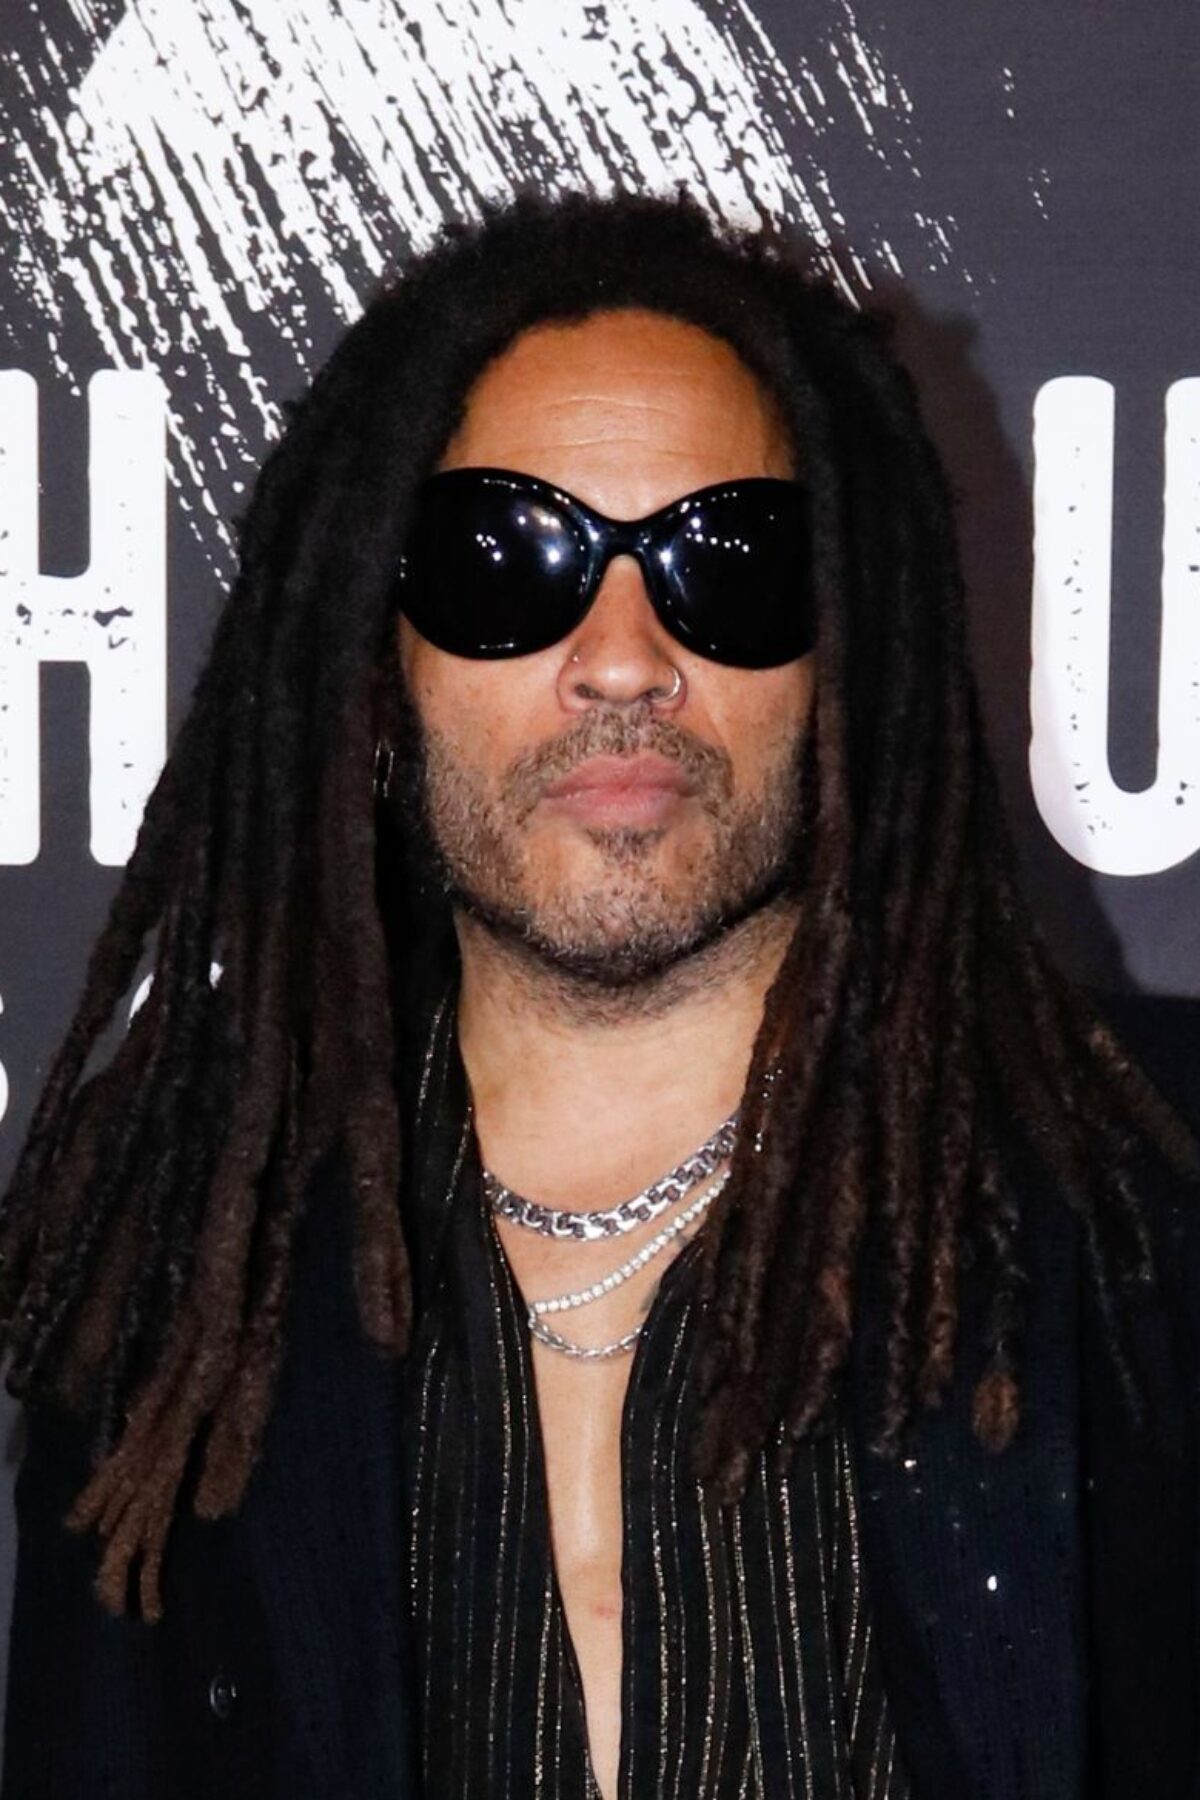 MEXICO CITY, MEXICO - OCTOBER 24: Lenny Kravitz poses for photo during the red carpet for the presentation of 'Sotol Nocheluna' a new distillate by Lenny Kravitz at Proyecto Público Prim on October 24, 2022 in Mexico City, Mexico. (Photo by Medios y Media/Getty Images)